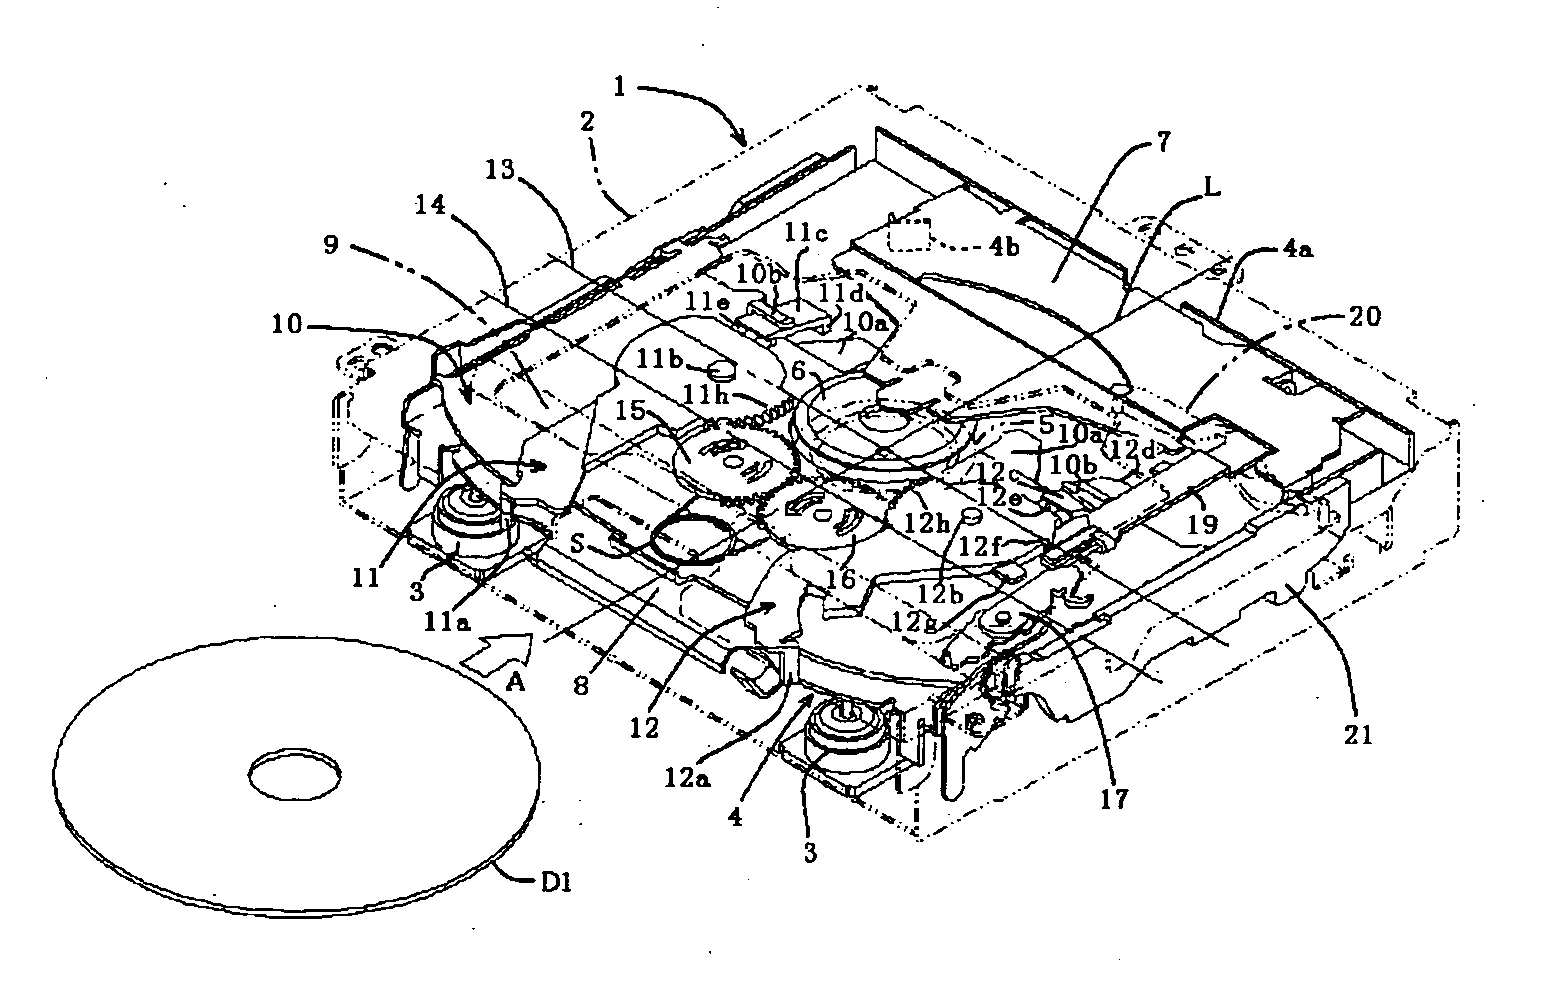 Disc centering device